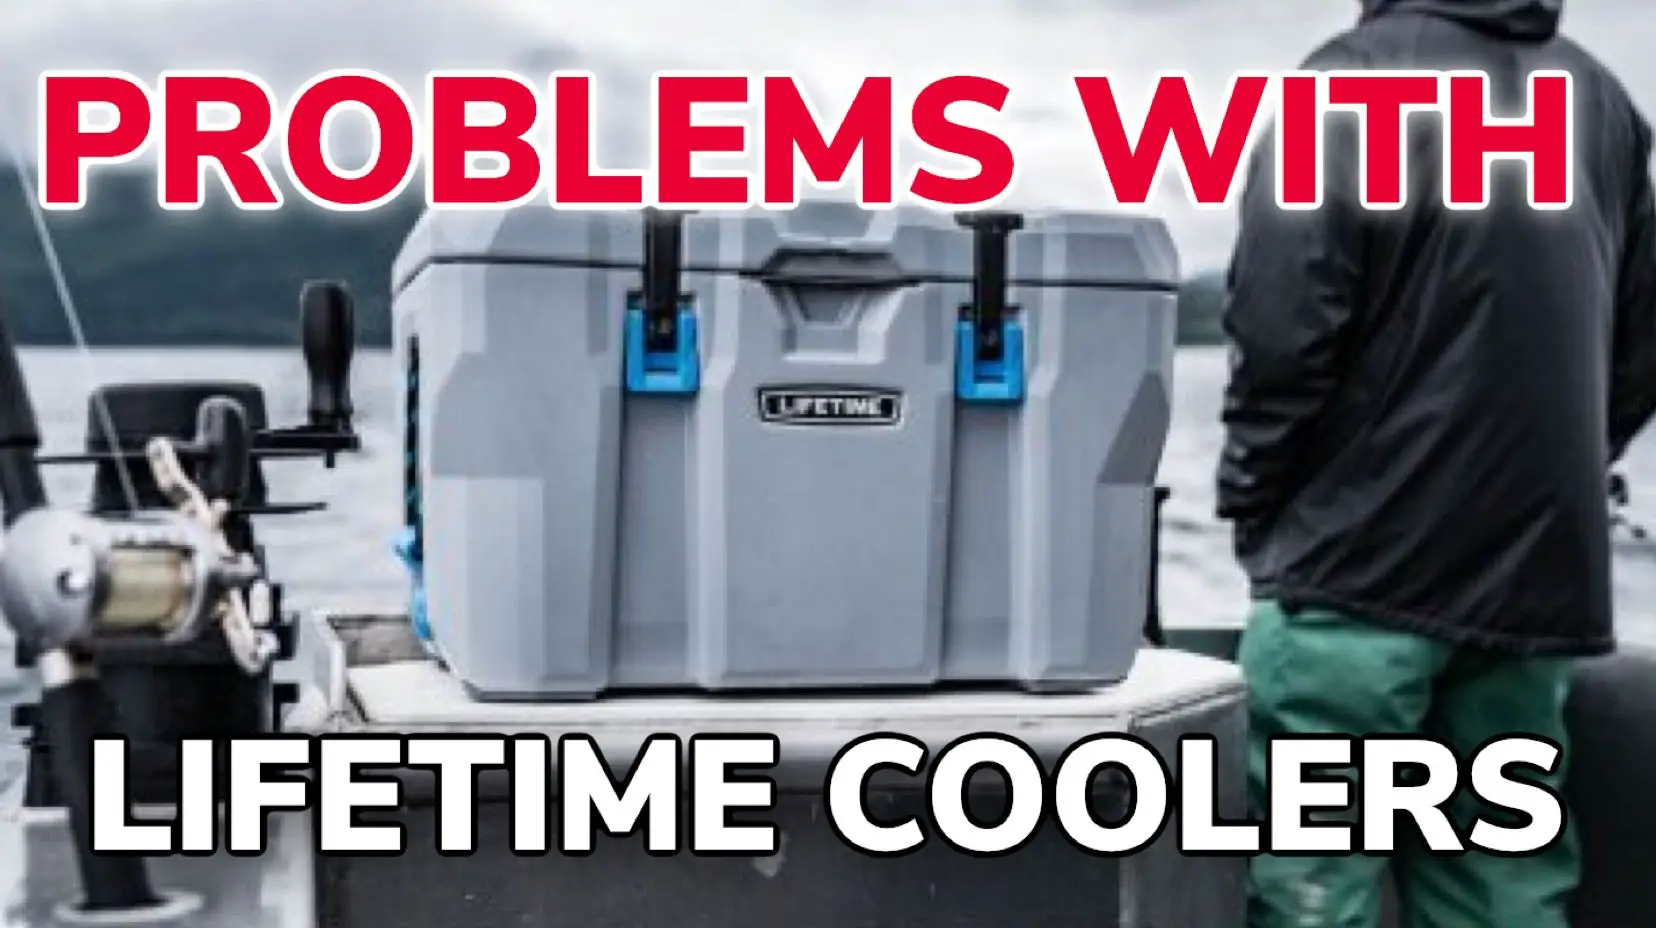 10 Problems With Lifetime Coolers: Read This Before You Buy